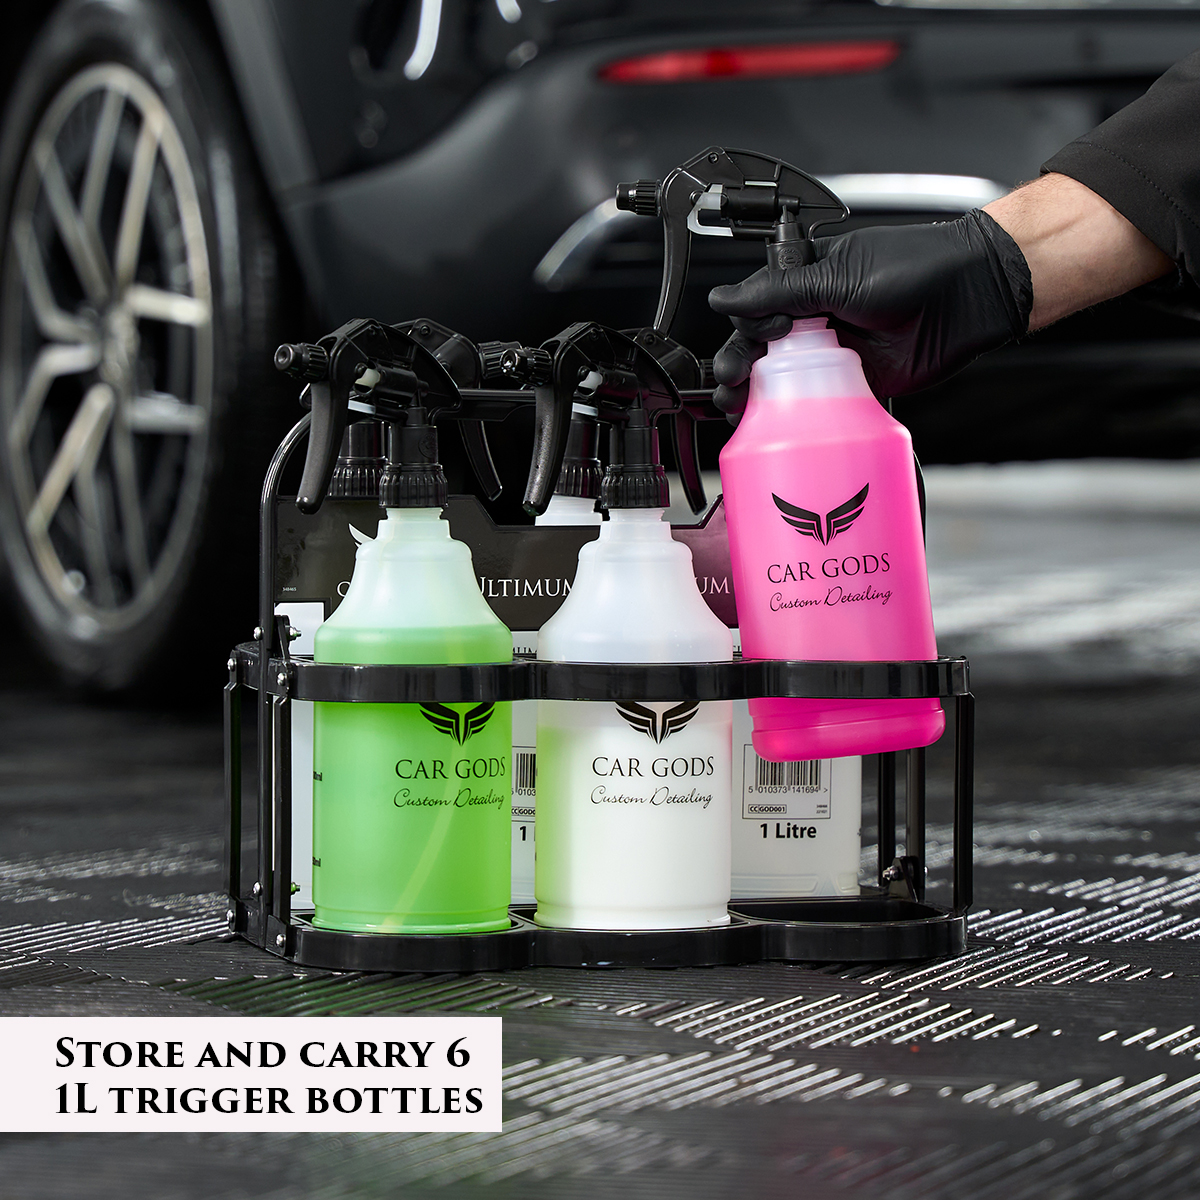 6x 1L professional trigger bottles stored in carrier